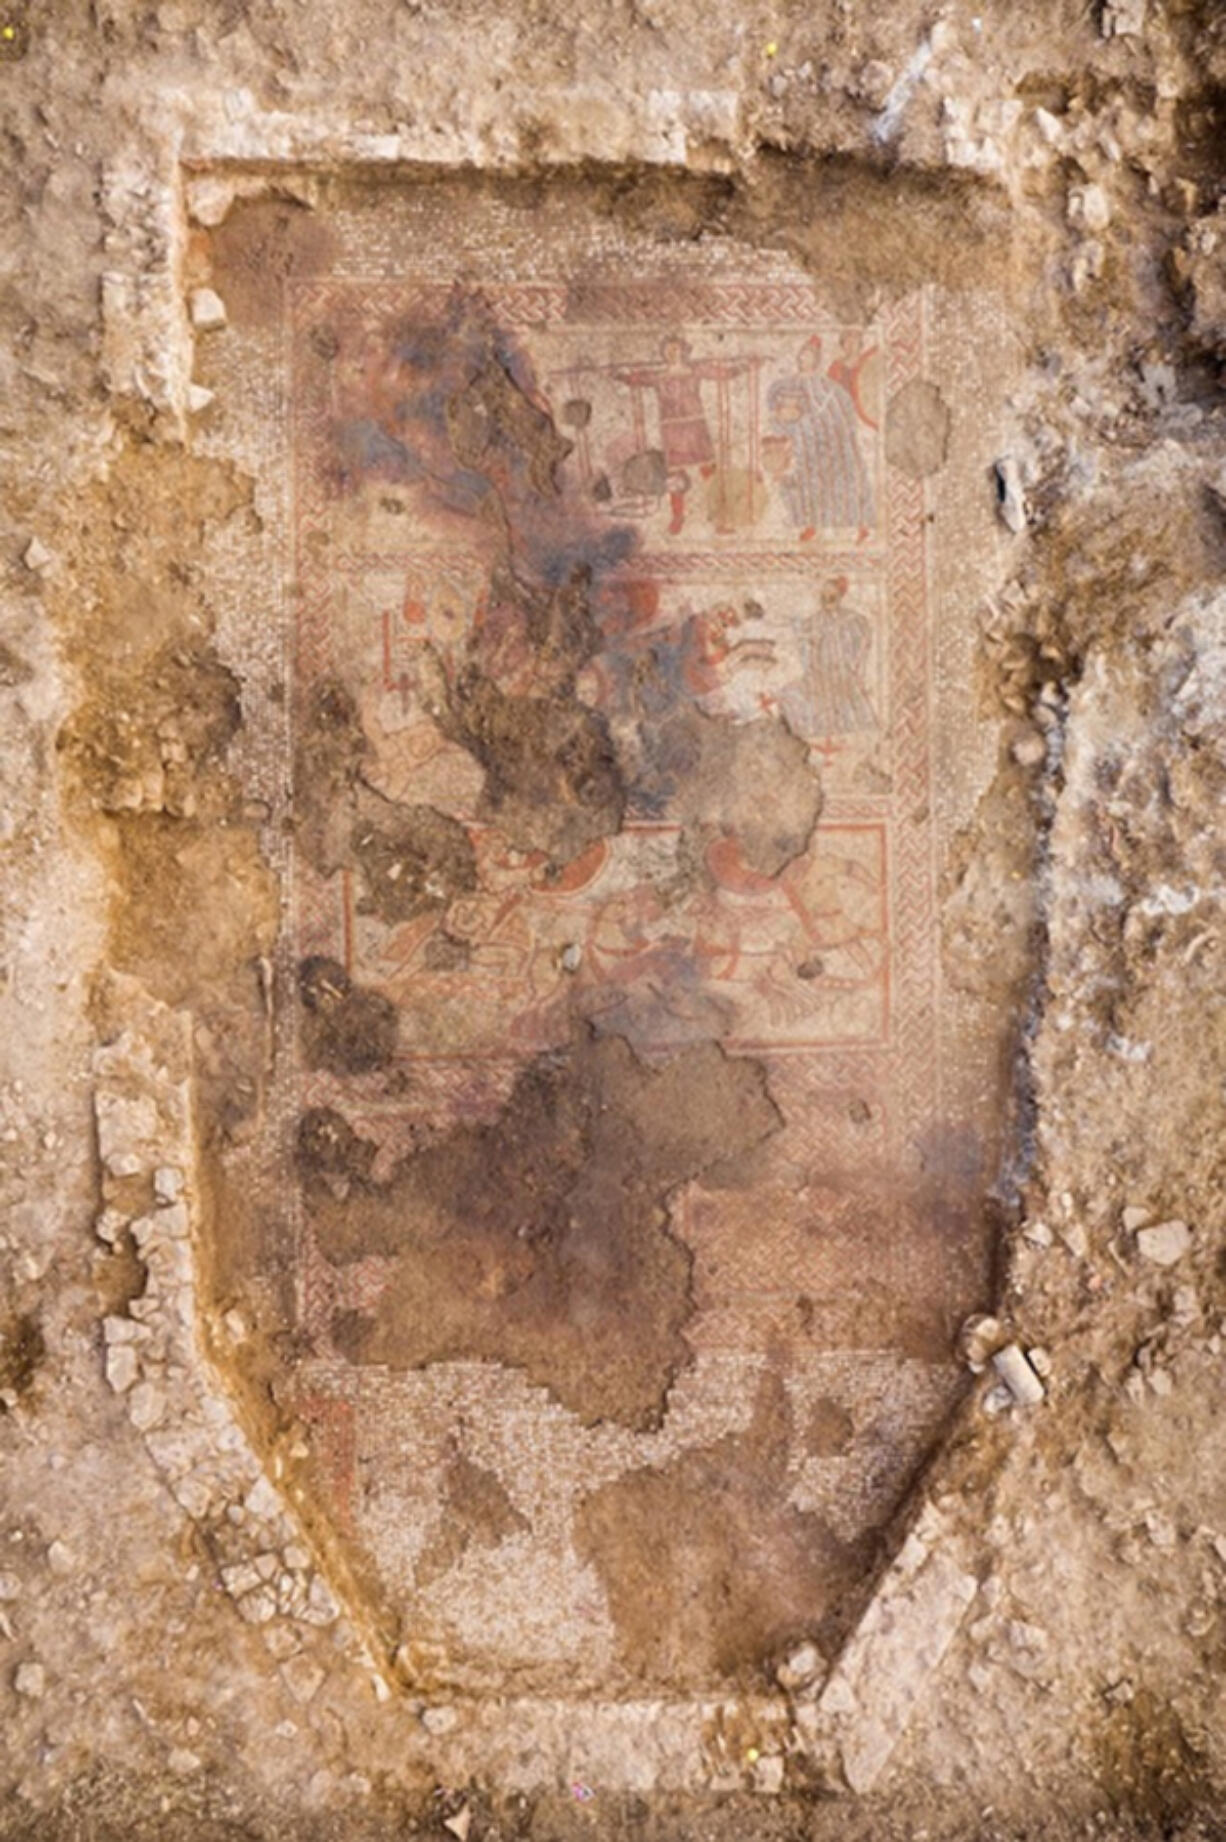 Image of the full mosaic in situ, displaying three panels, with damage, featuring Achilles. According to a team from the University of Leicester Archaeological Services, the mosaic was discovered last year by the son of a landowner in the English county of Rutland.